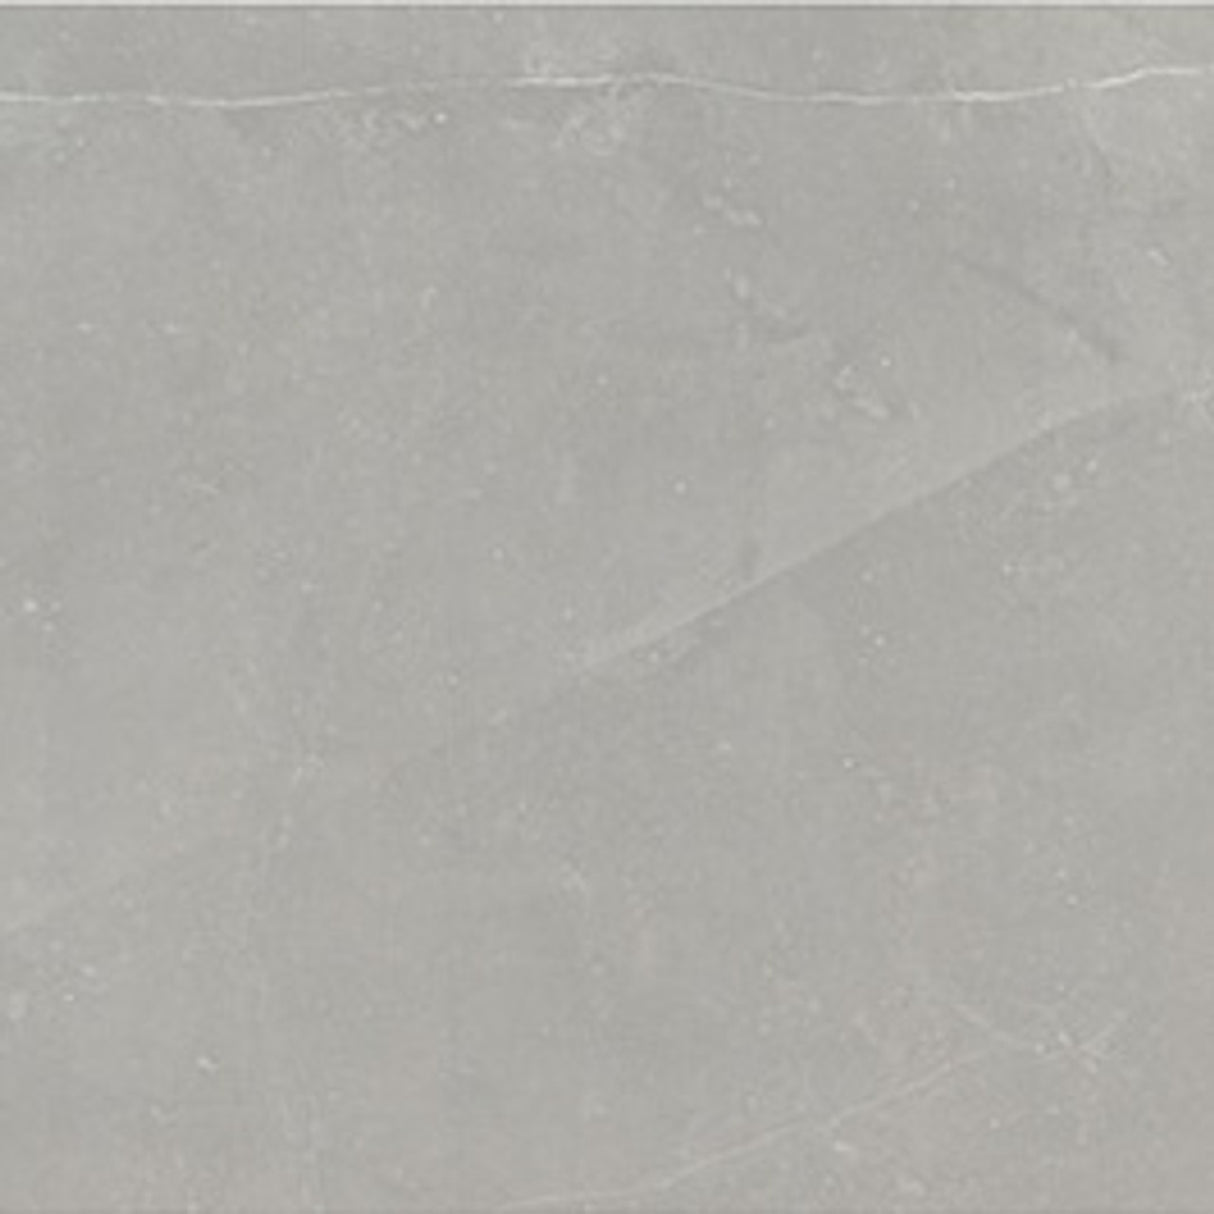 sande grey polished porcelain floor and wall tile msi collection NSANGRE2424P product shot multiple tiles angle view #Size_24"x24"